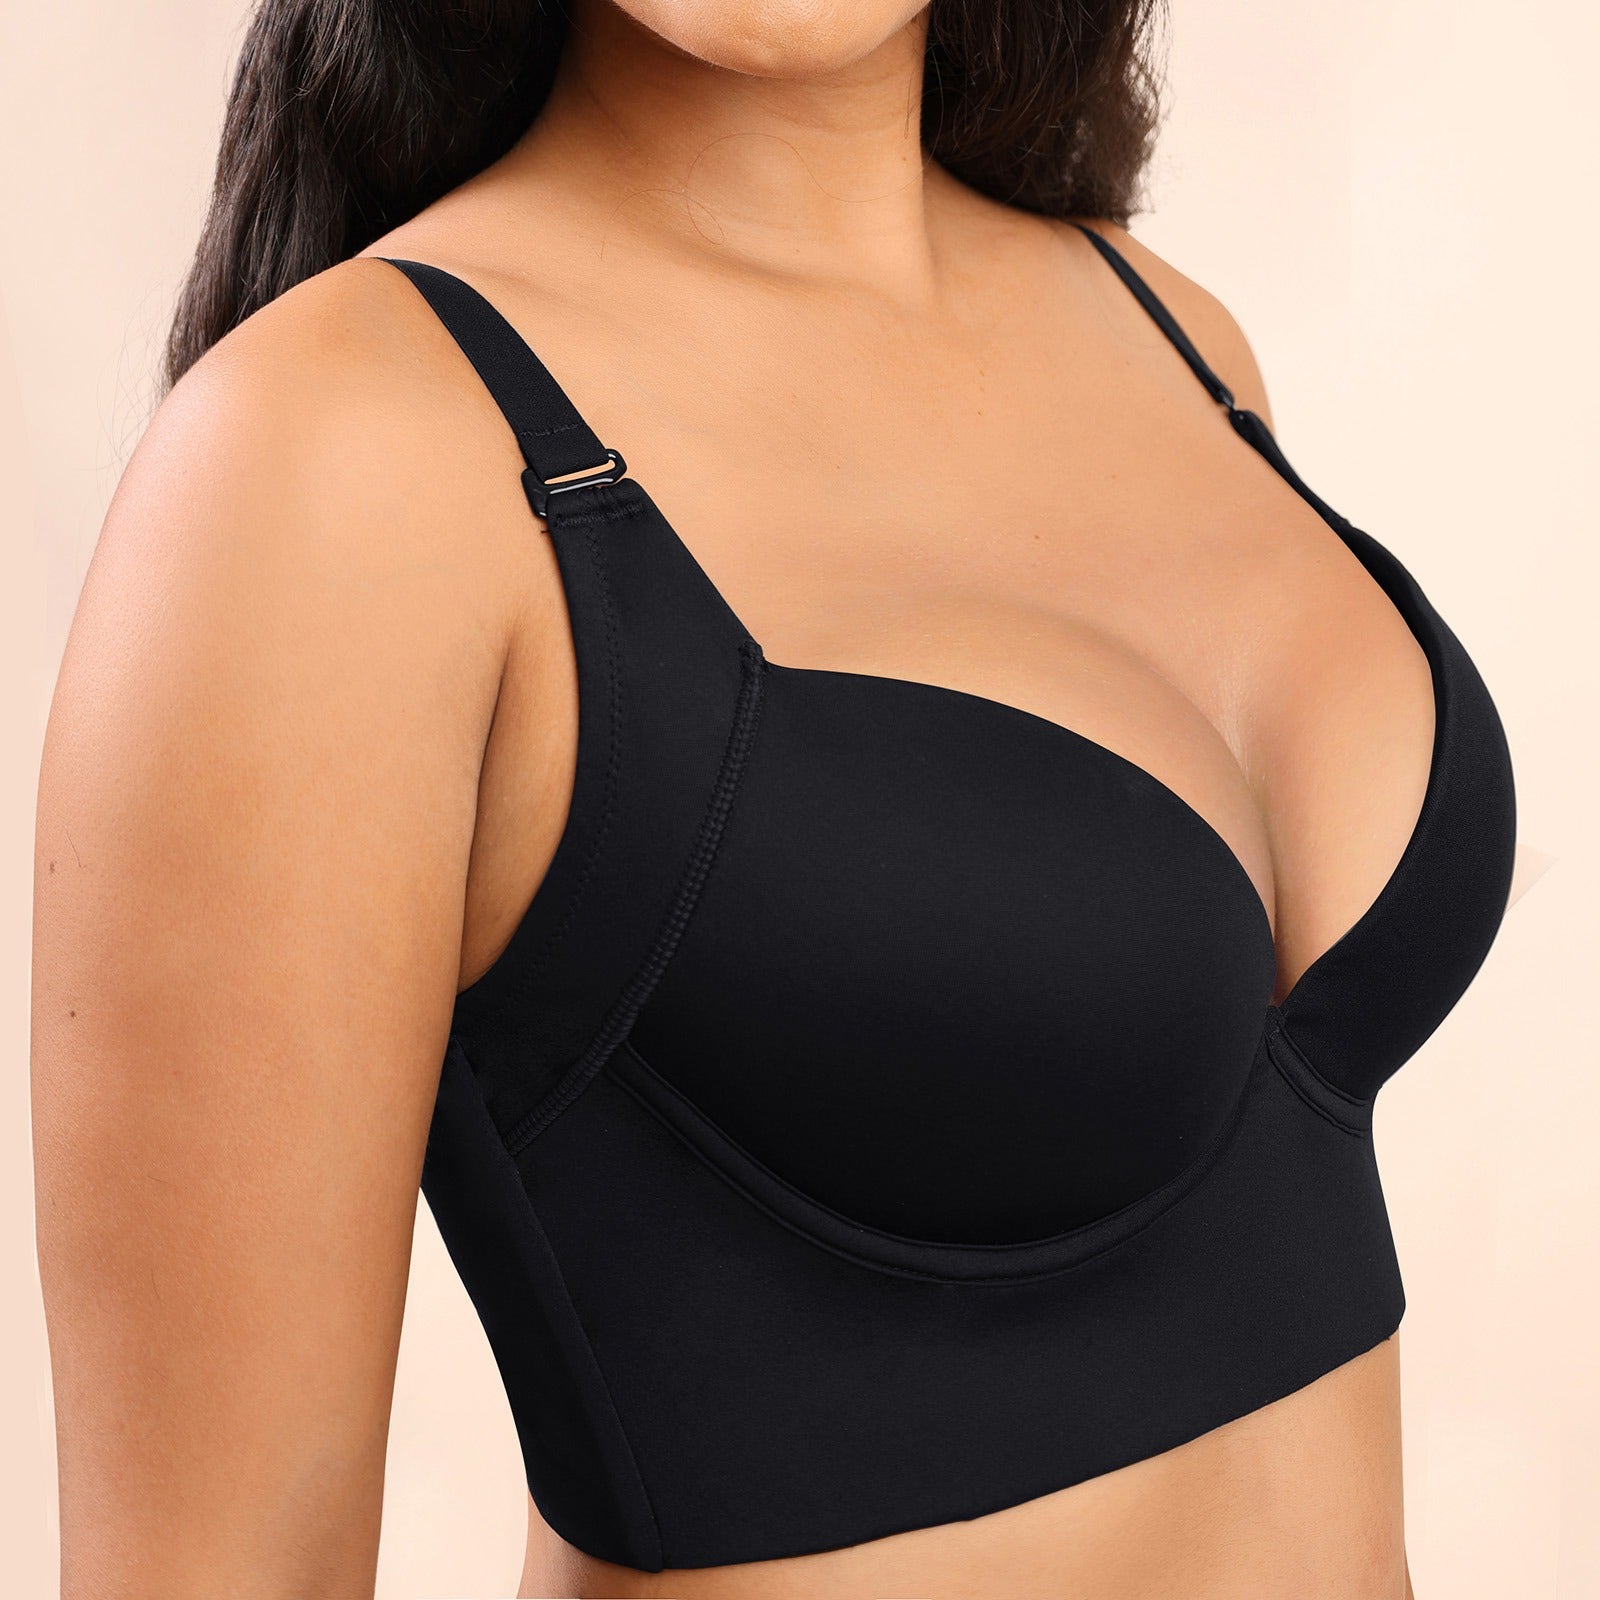  Women's Deep Cup Bra Hides Back Fat,Shapewear Incorporated Push  Up Sports Bra,Full Back Coverage Push Up Sports Bra (Black,34D) : Clothing,  Shoes & Jewelry